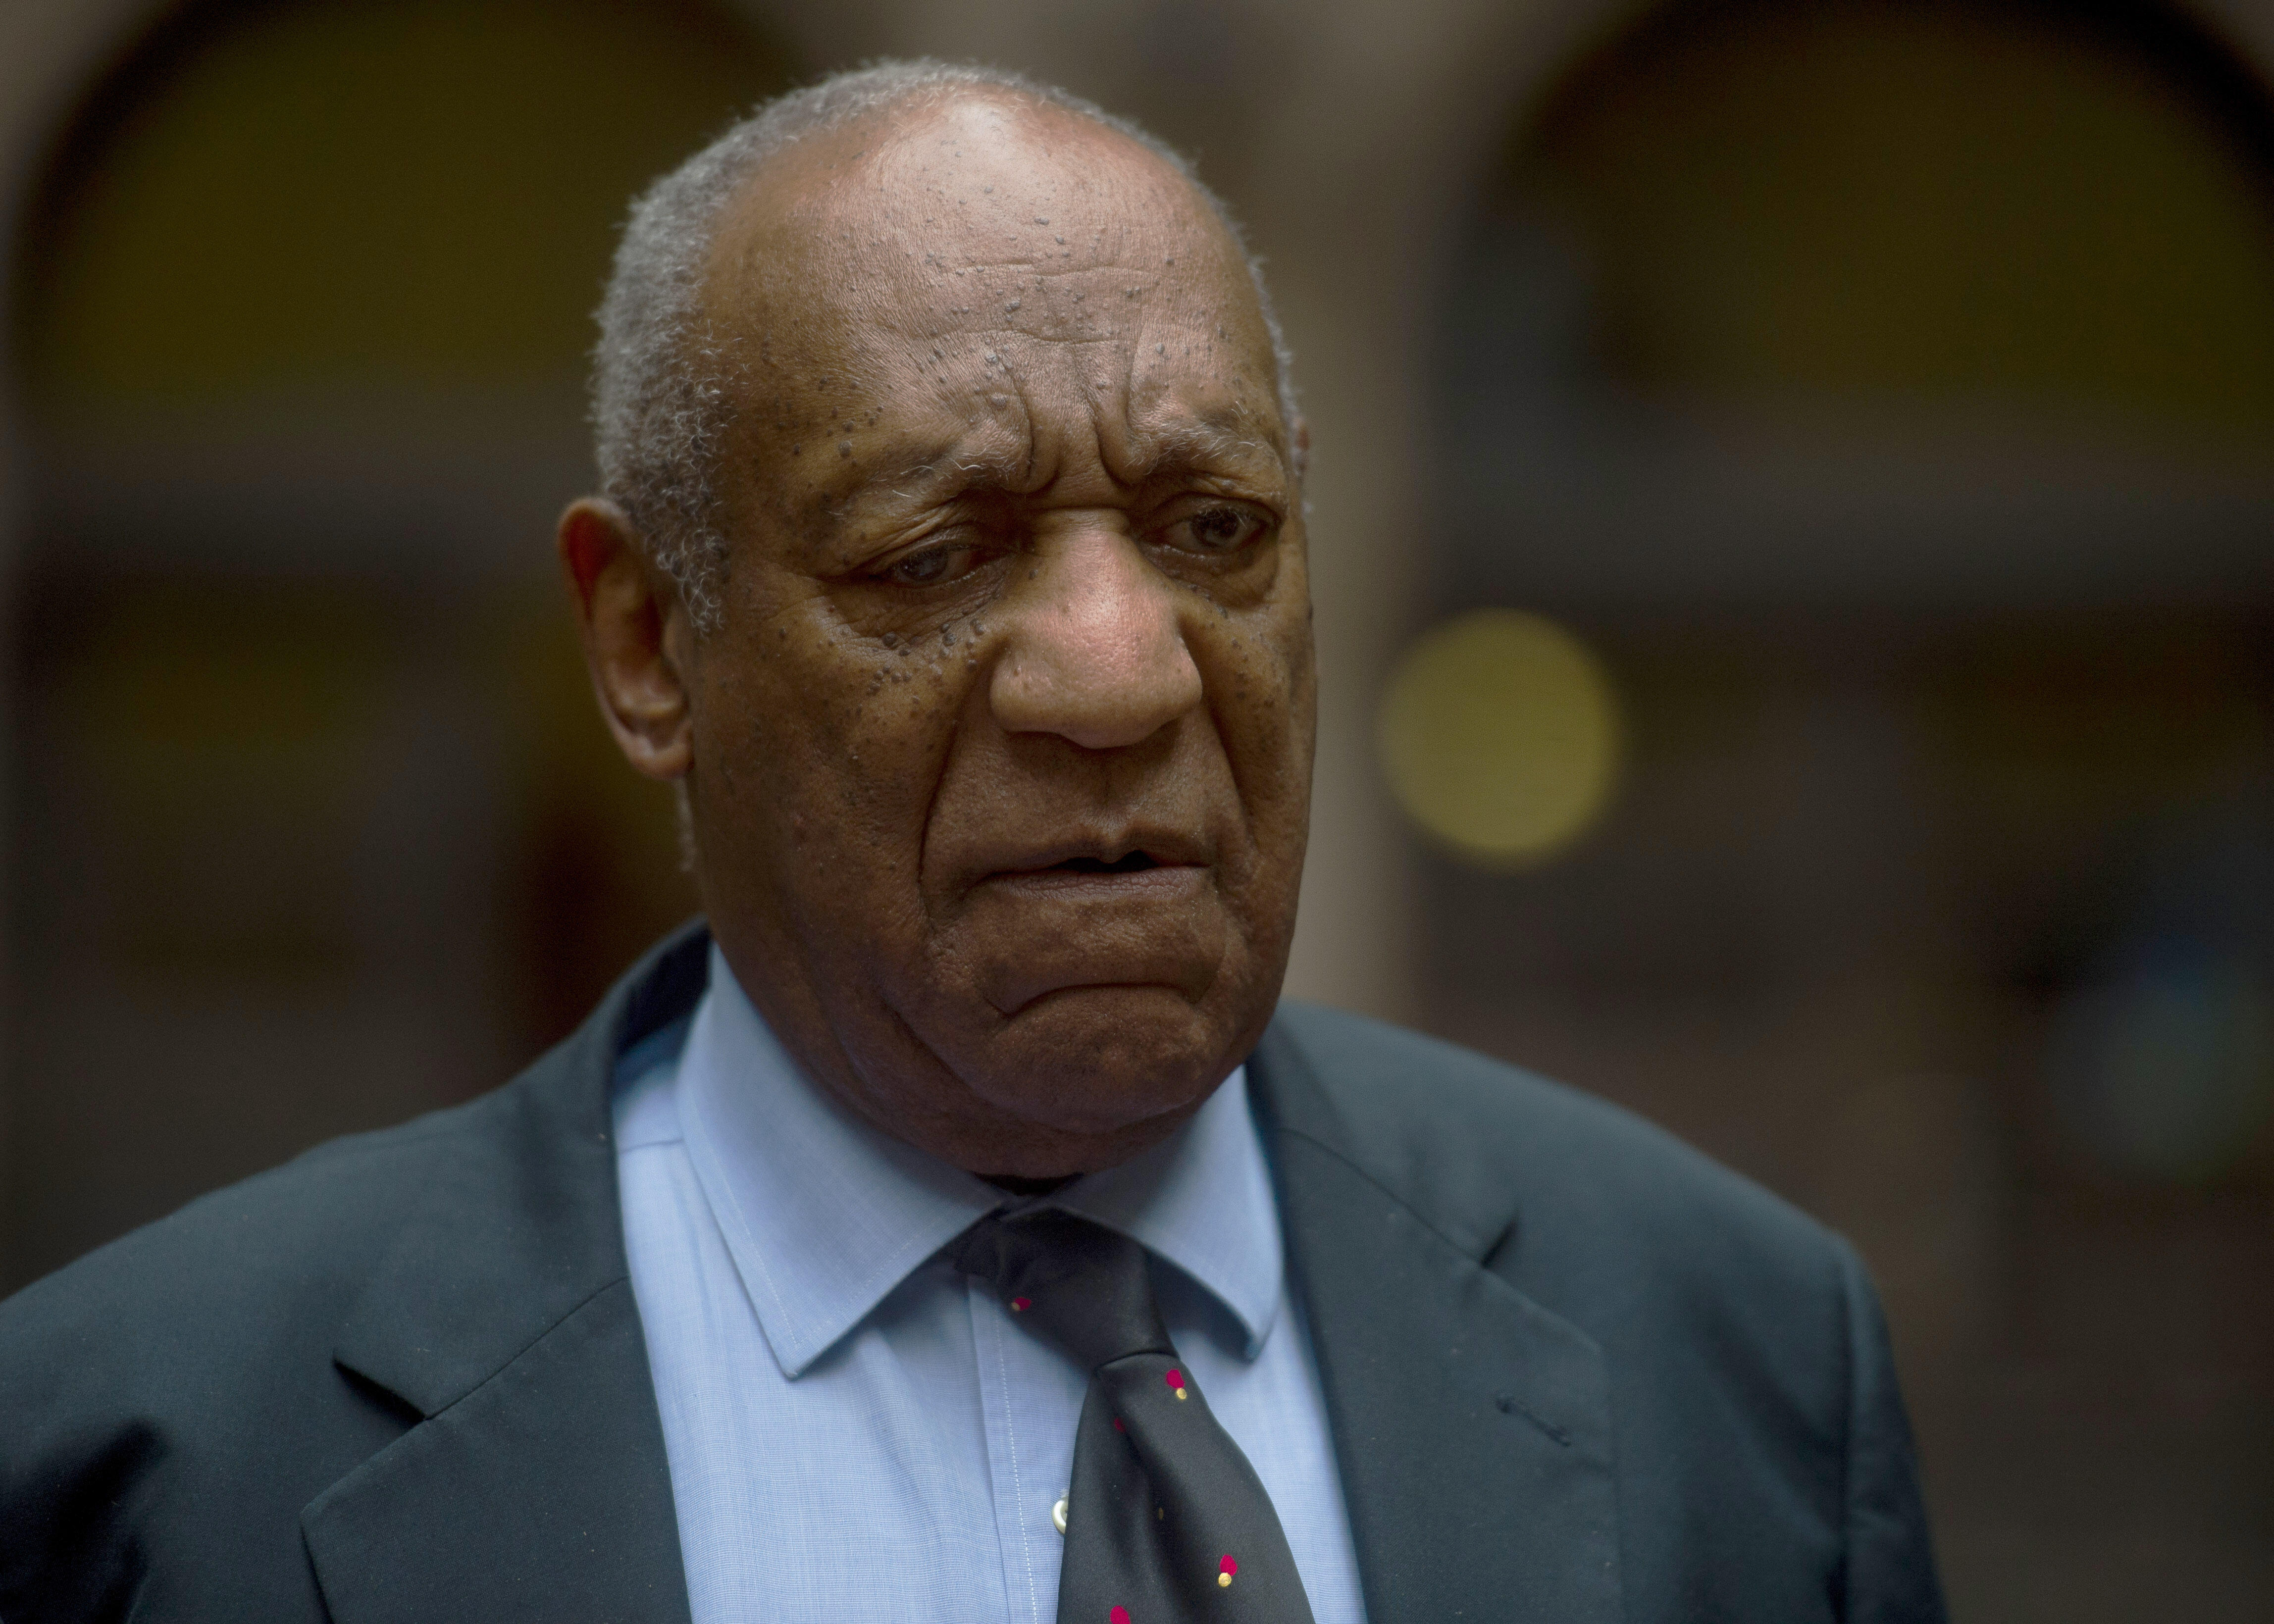 PITTSBURGH, PA - MAY 24:  Bill Cosby speaks to the media as he leaves the Allegheny County Courthouse May 24, 2017 in Pittsburgh, Pennsylvania. Jury selection entered day three in Cosby's trial on sexual assault charges.  (Photo by Nate Smallwood-Pool/Get